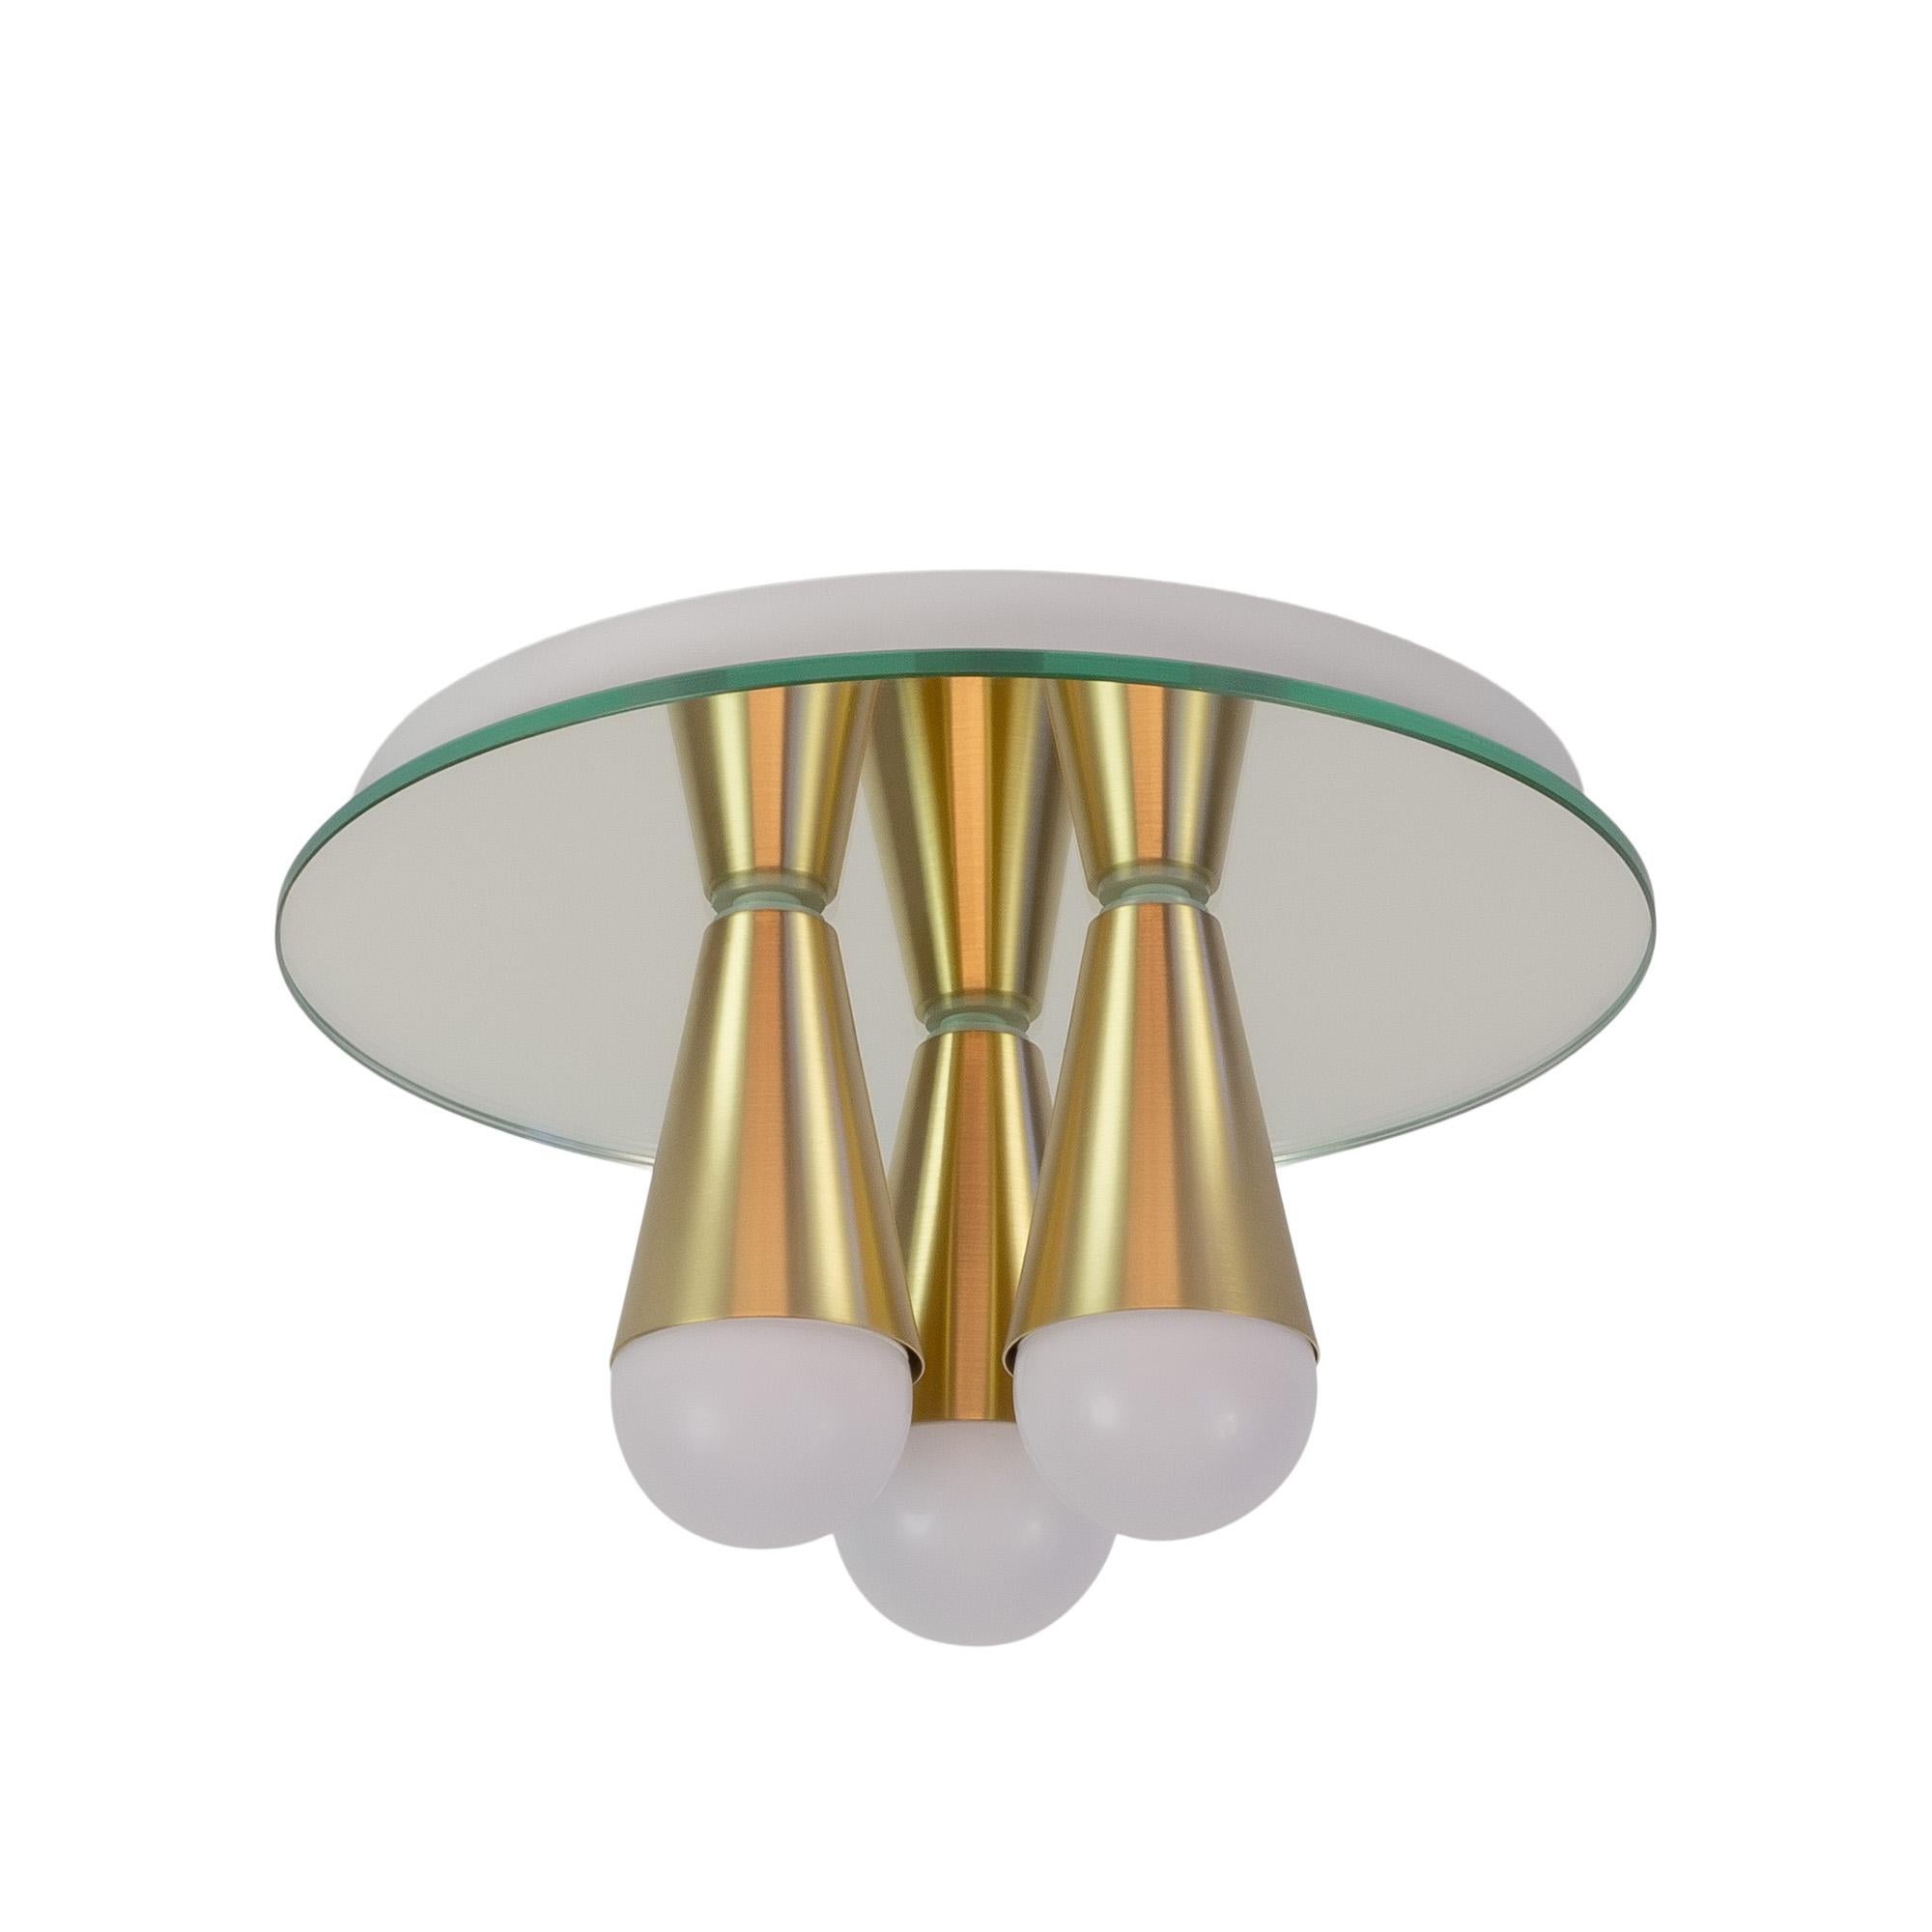 This listing is for a pair of the Echo three sconces. The price includes two lights.

Simple, elegant and playful, the Echo Series is a line of surface-mount fixtures that can be used on a wall or ceiling. White or brass cones mount to mirrored